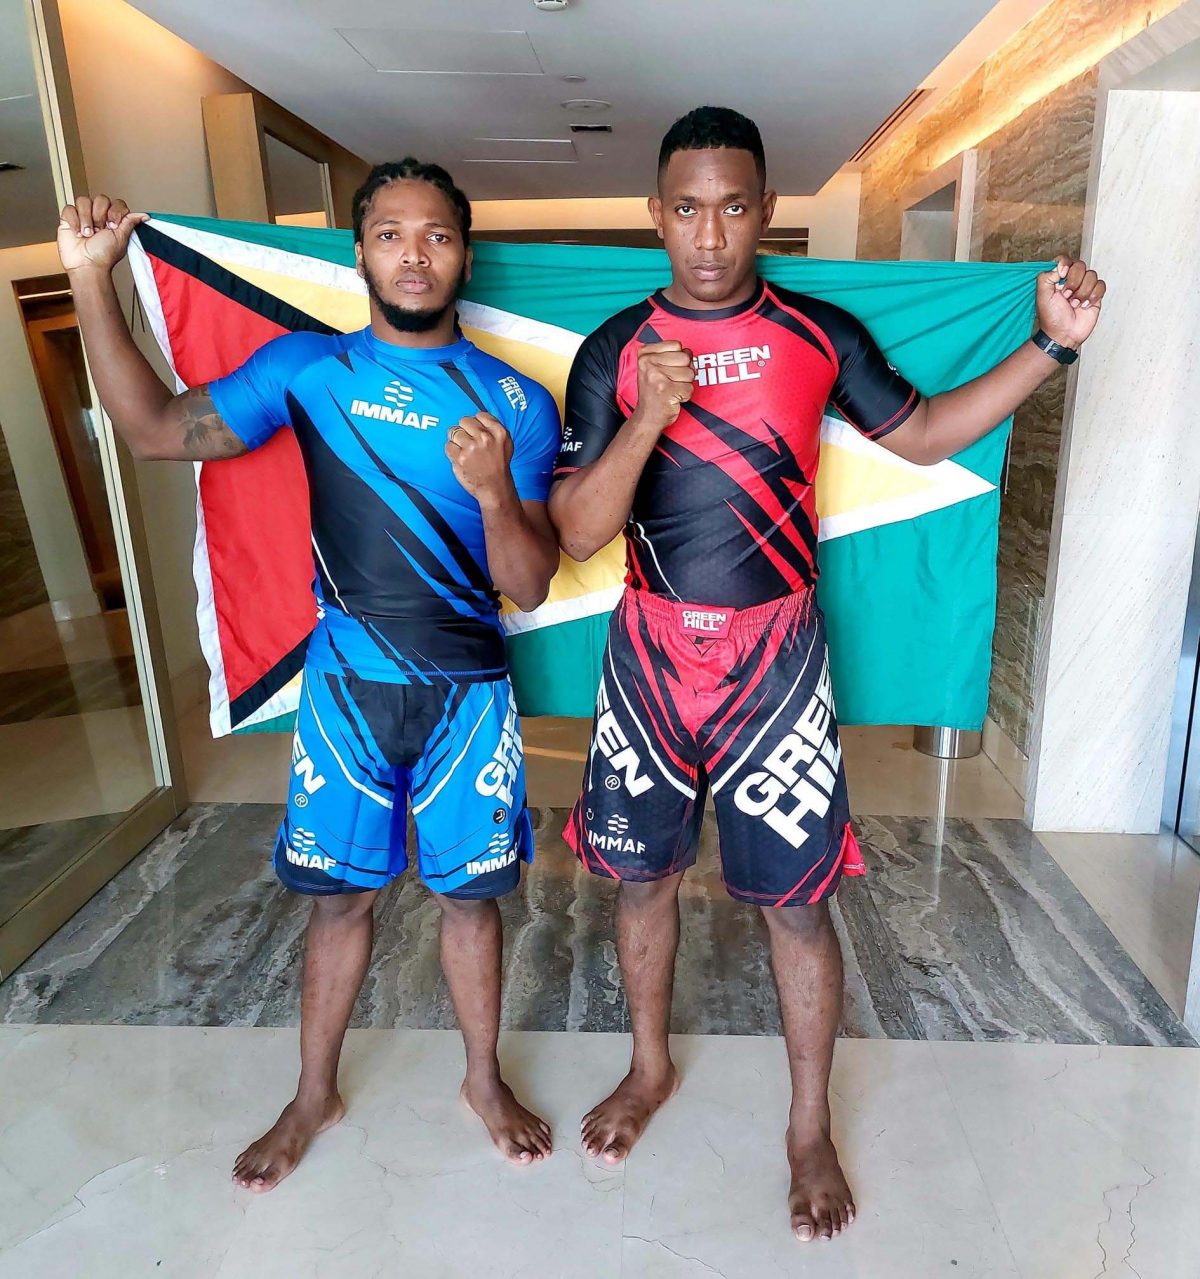 Guyana’s debutants at the recent IMMAF World Championship in UAE (from left) Carlos D’Anjou and Ijaz Cave